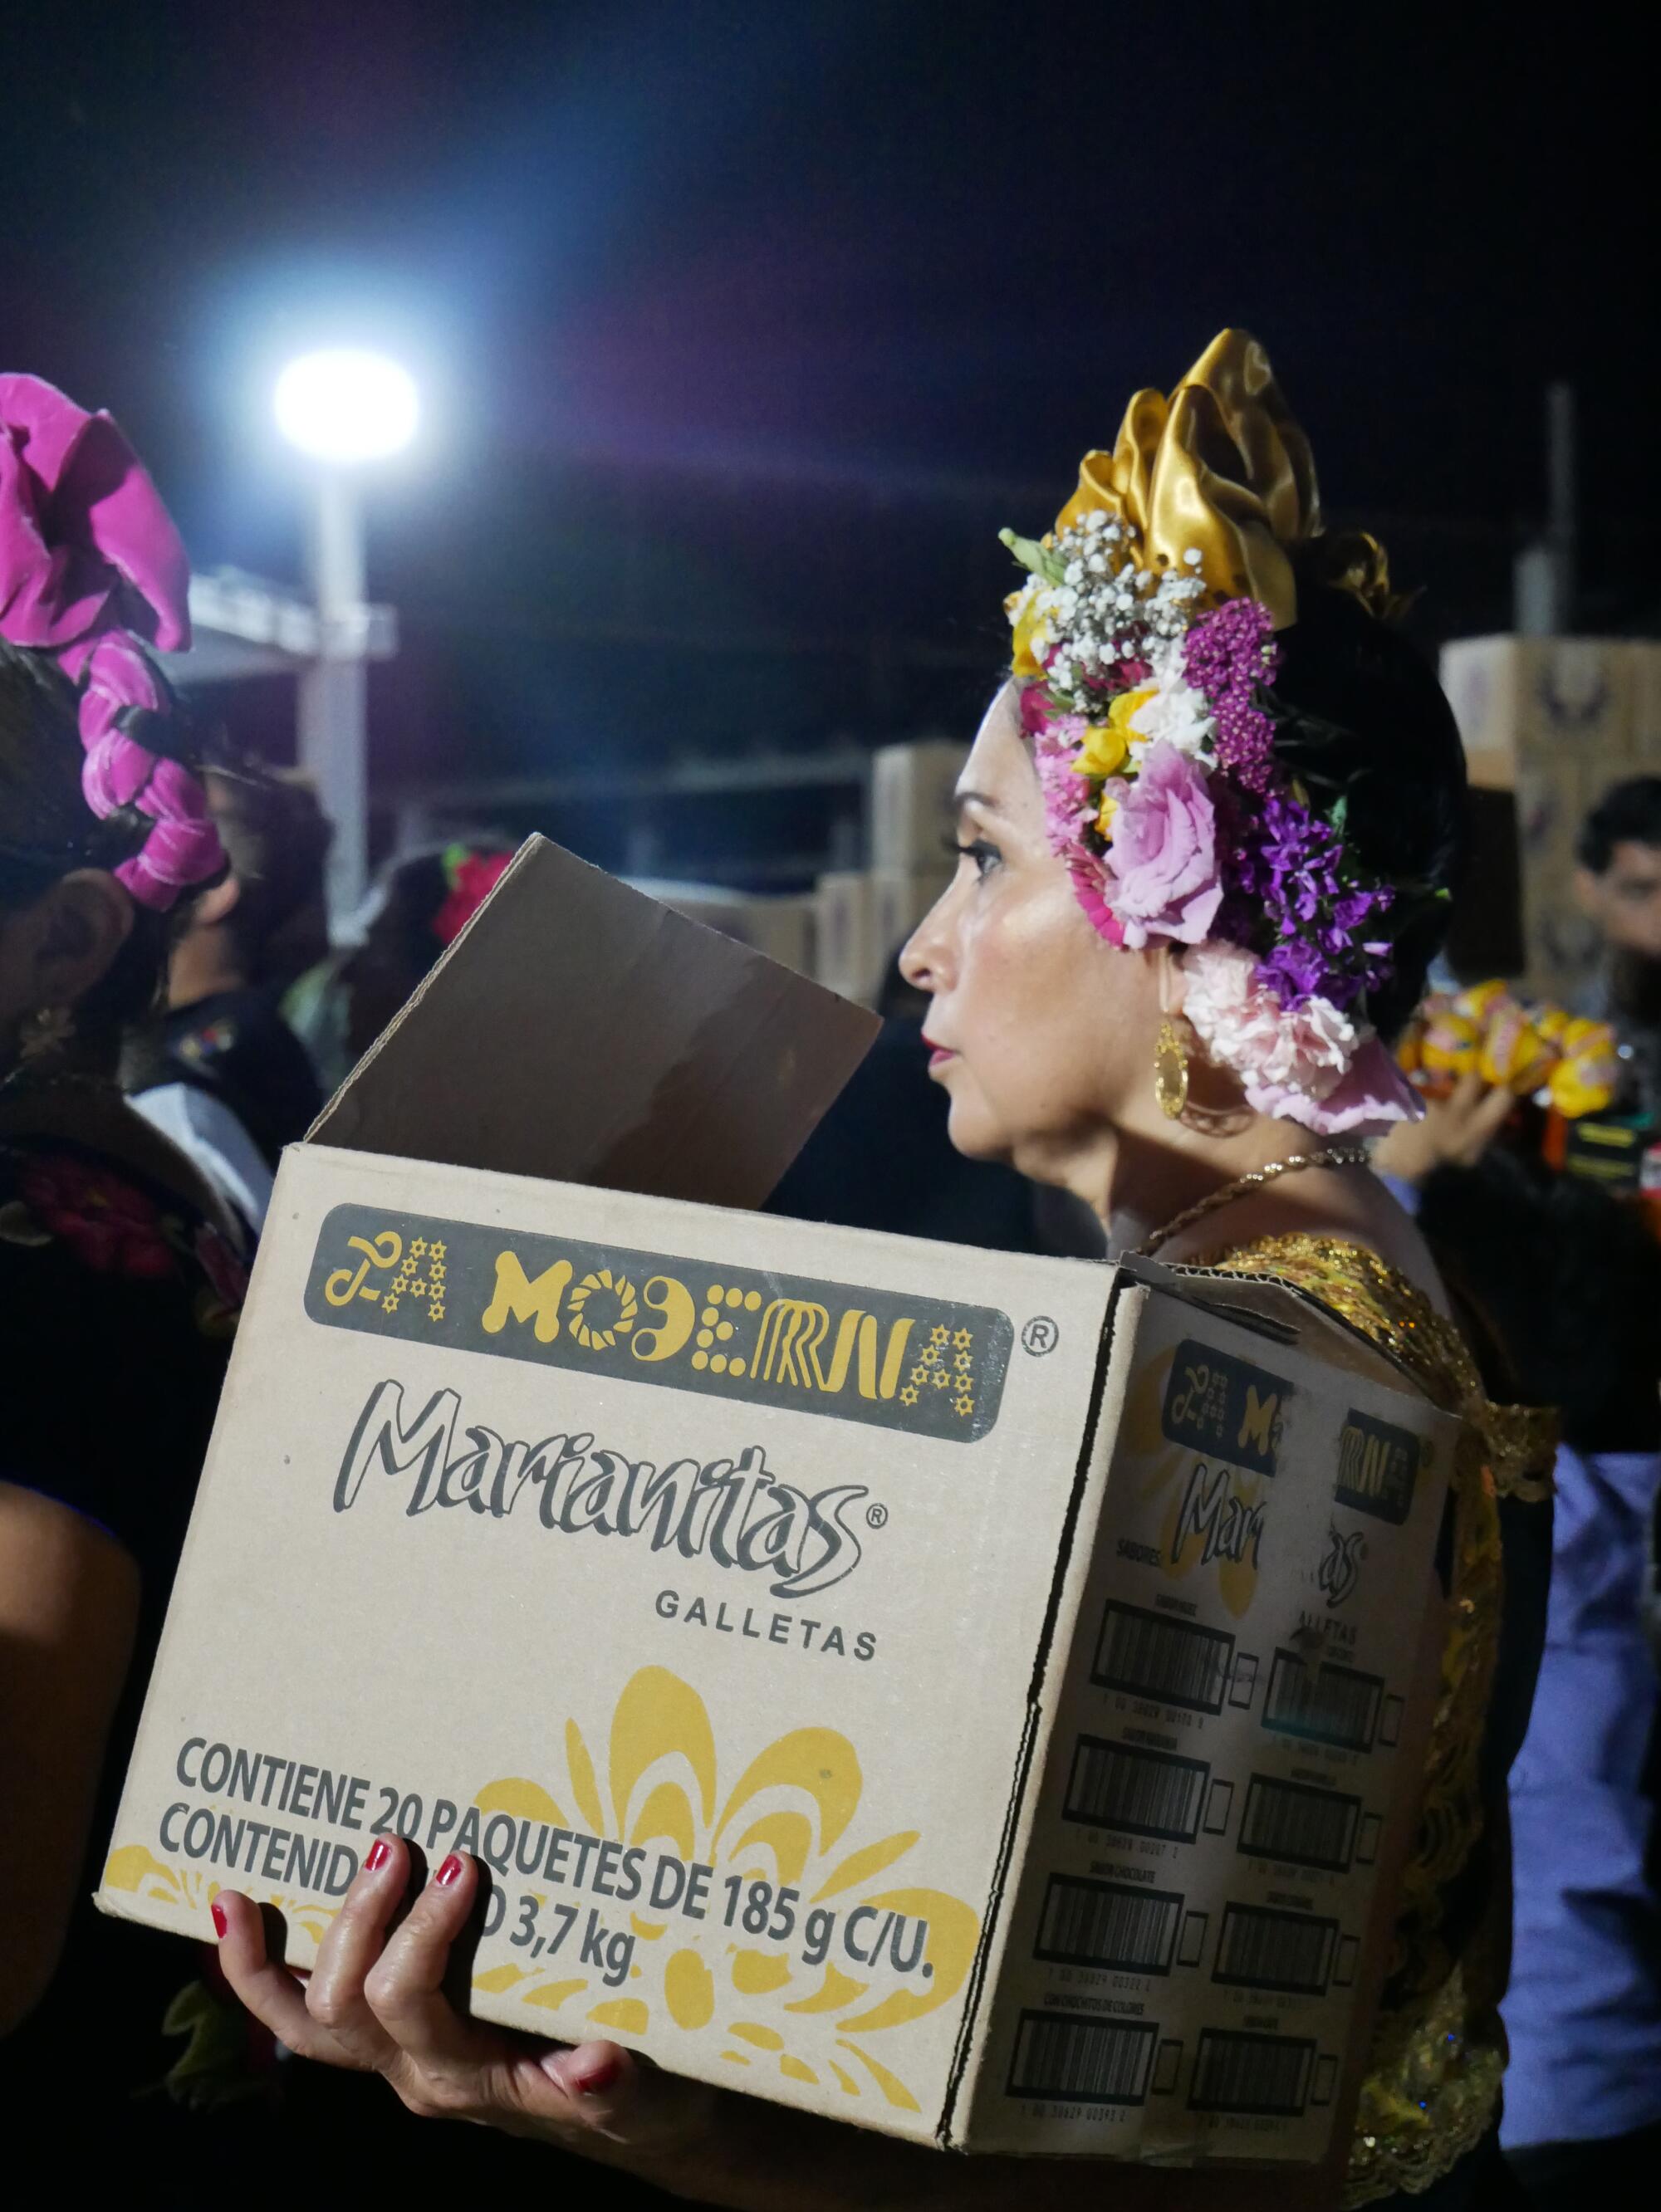 An attendee at the Vela wears an intricate headpiece while carrying food into the all-night event.